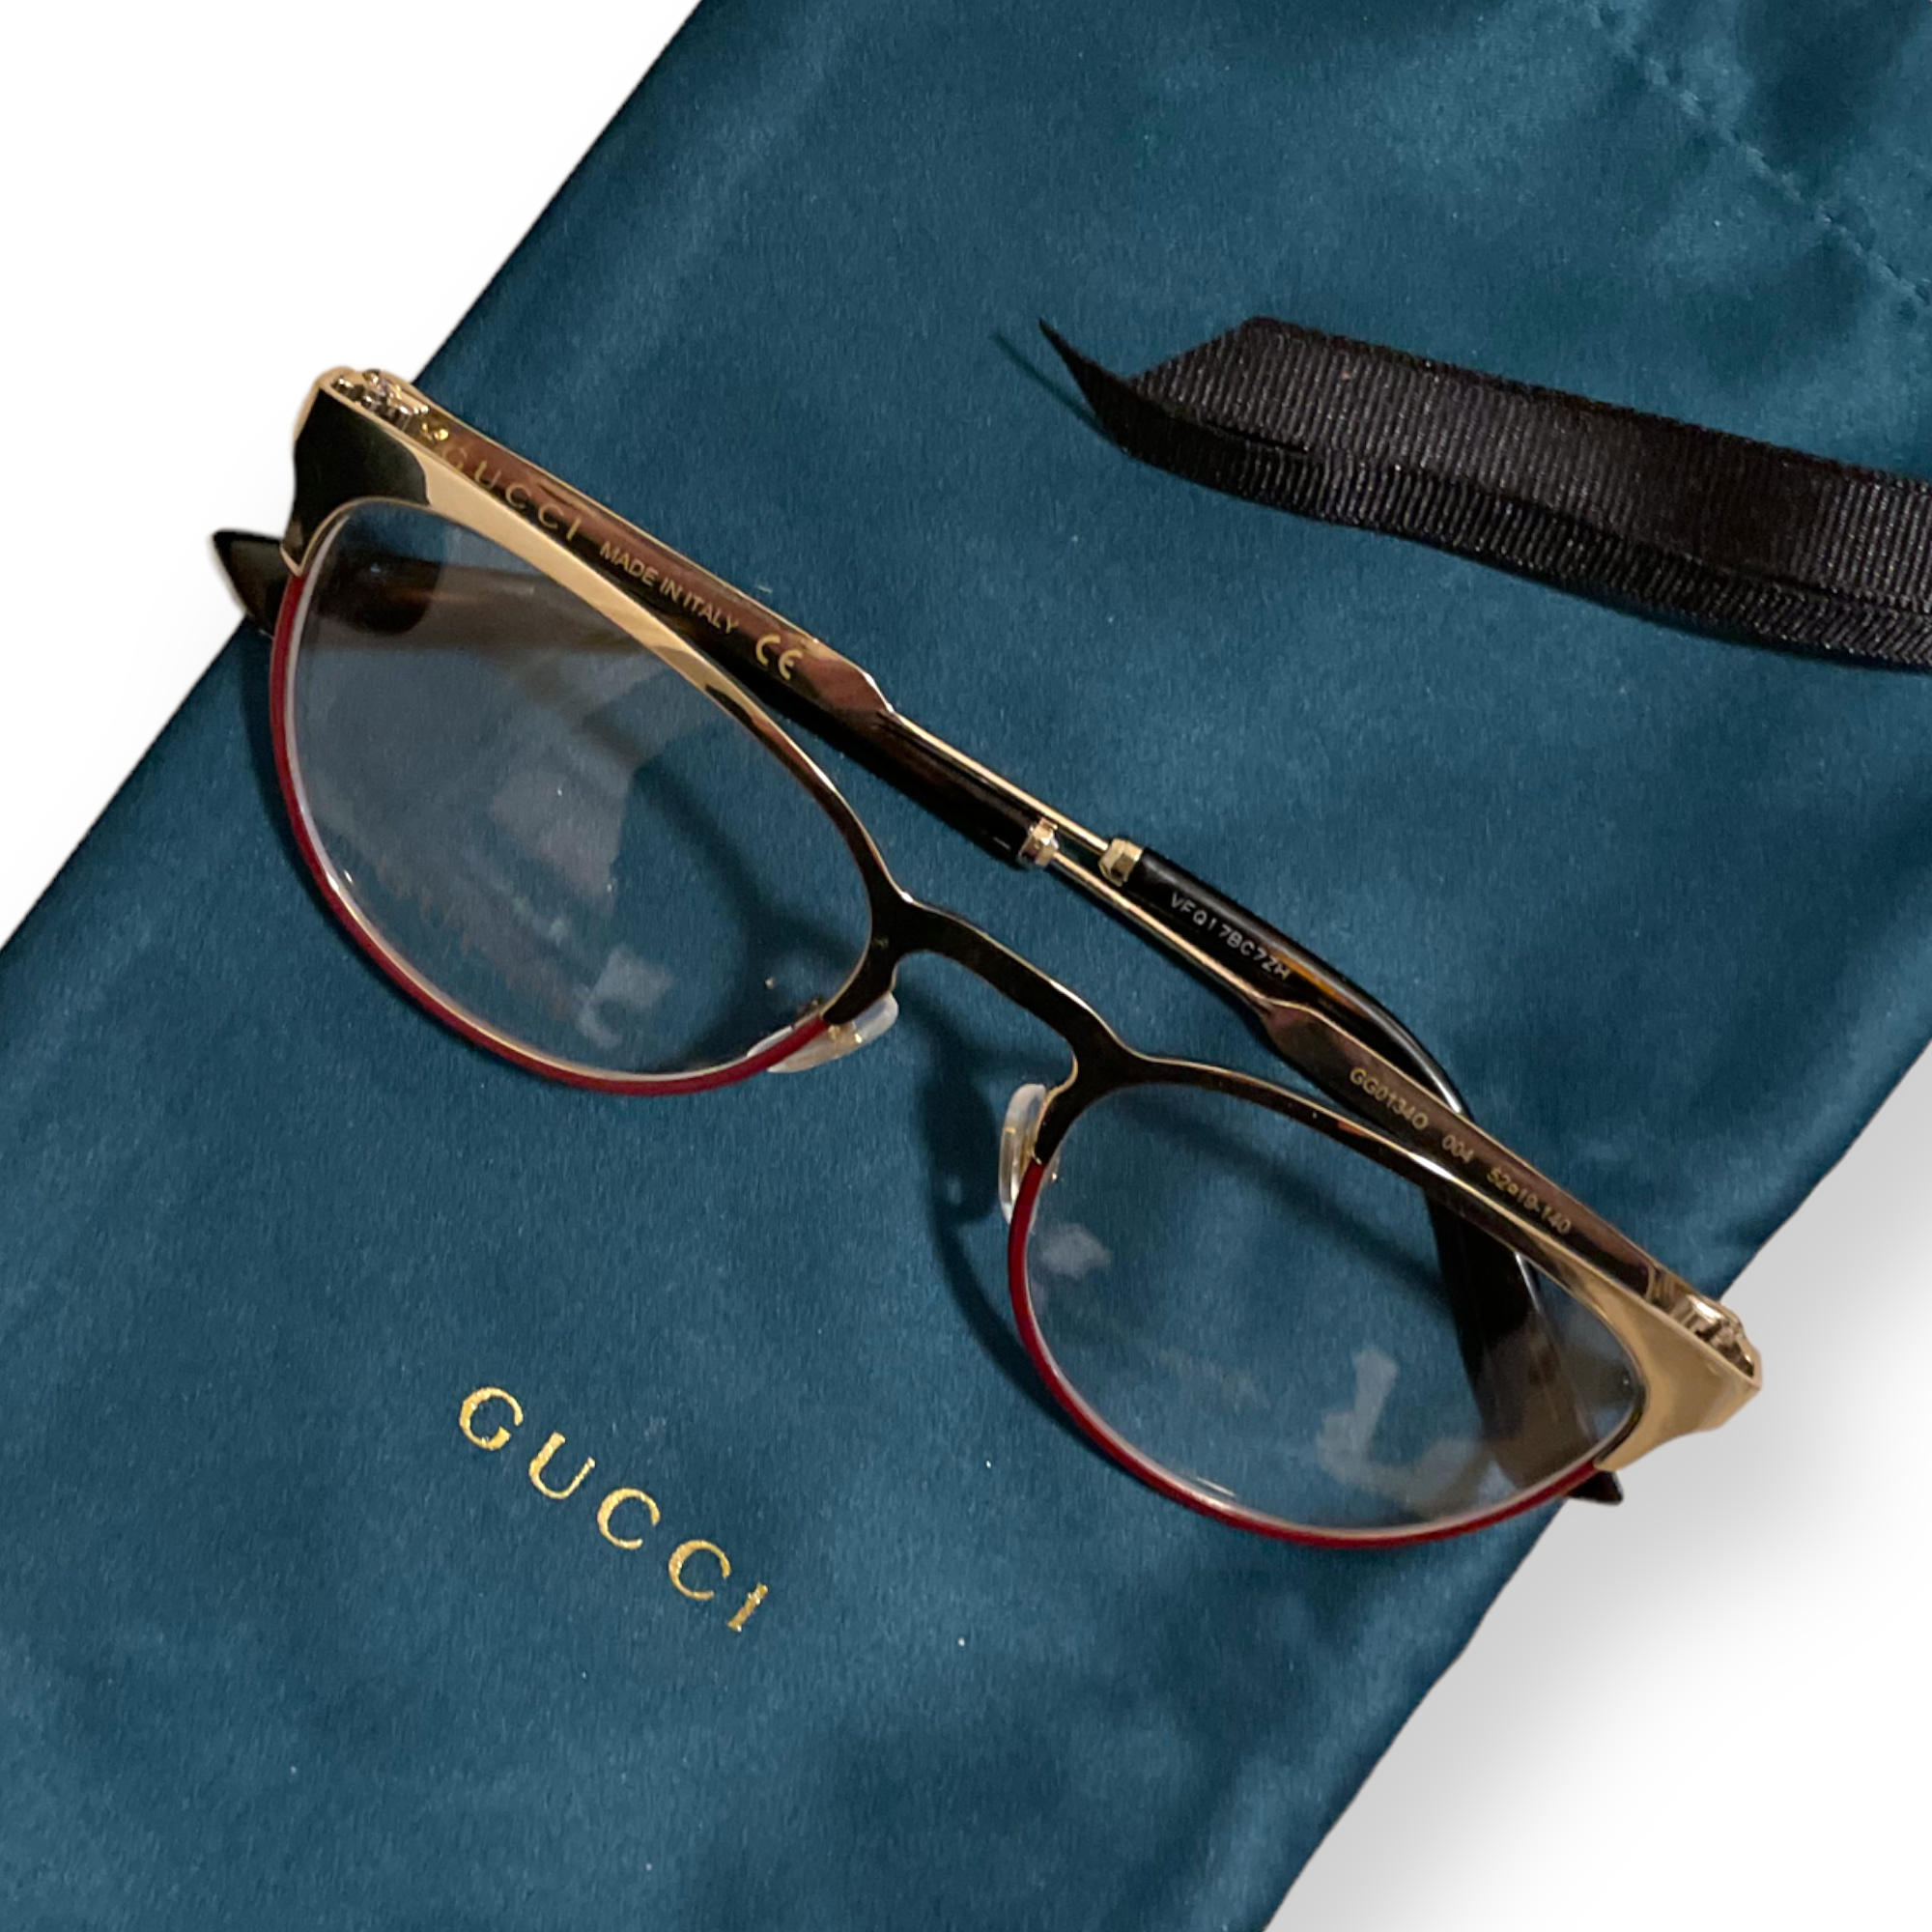 Gucci Women's 61mm Optical Frames with Demo Lens